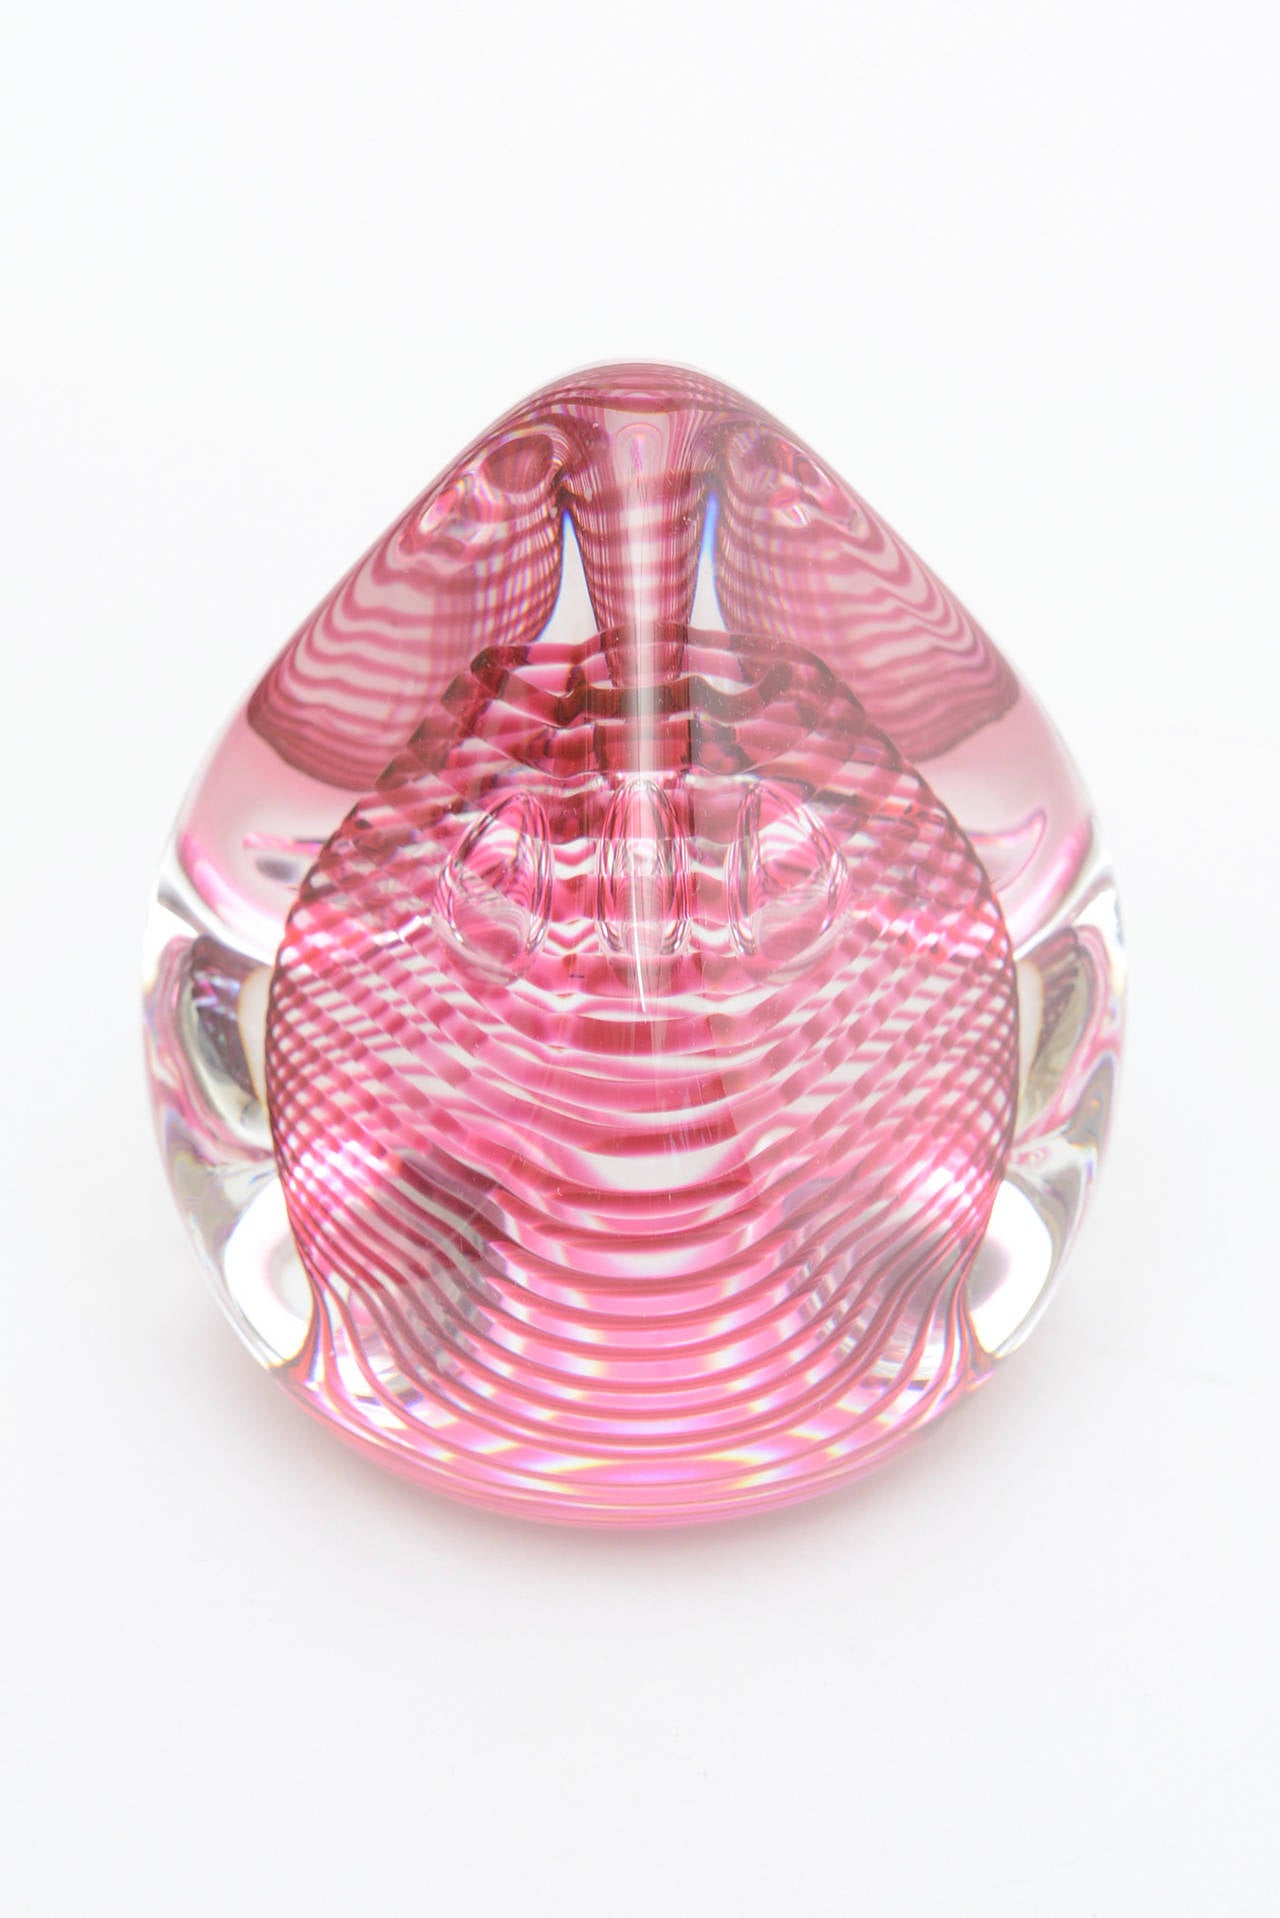 This gorgeous Swedish glass paperweight and or object looks like a teardrop or a kiss candy. Luscious bands of magenta pink swirl in spiral form incased in clear glass there are three floating teardrop bubbles inside the spirals. This is from Studio